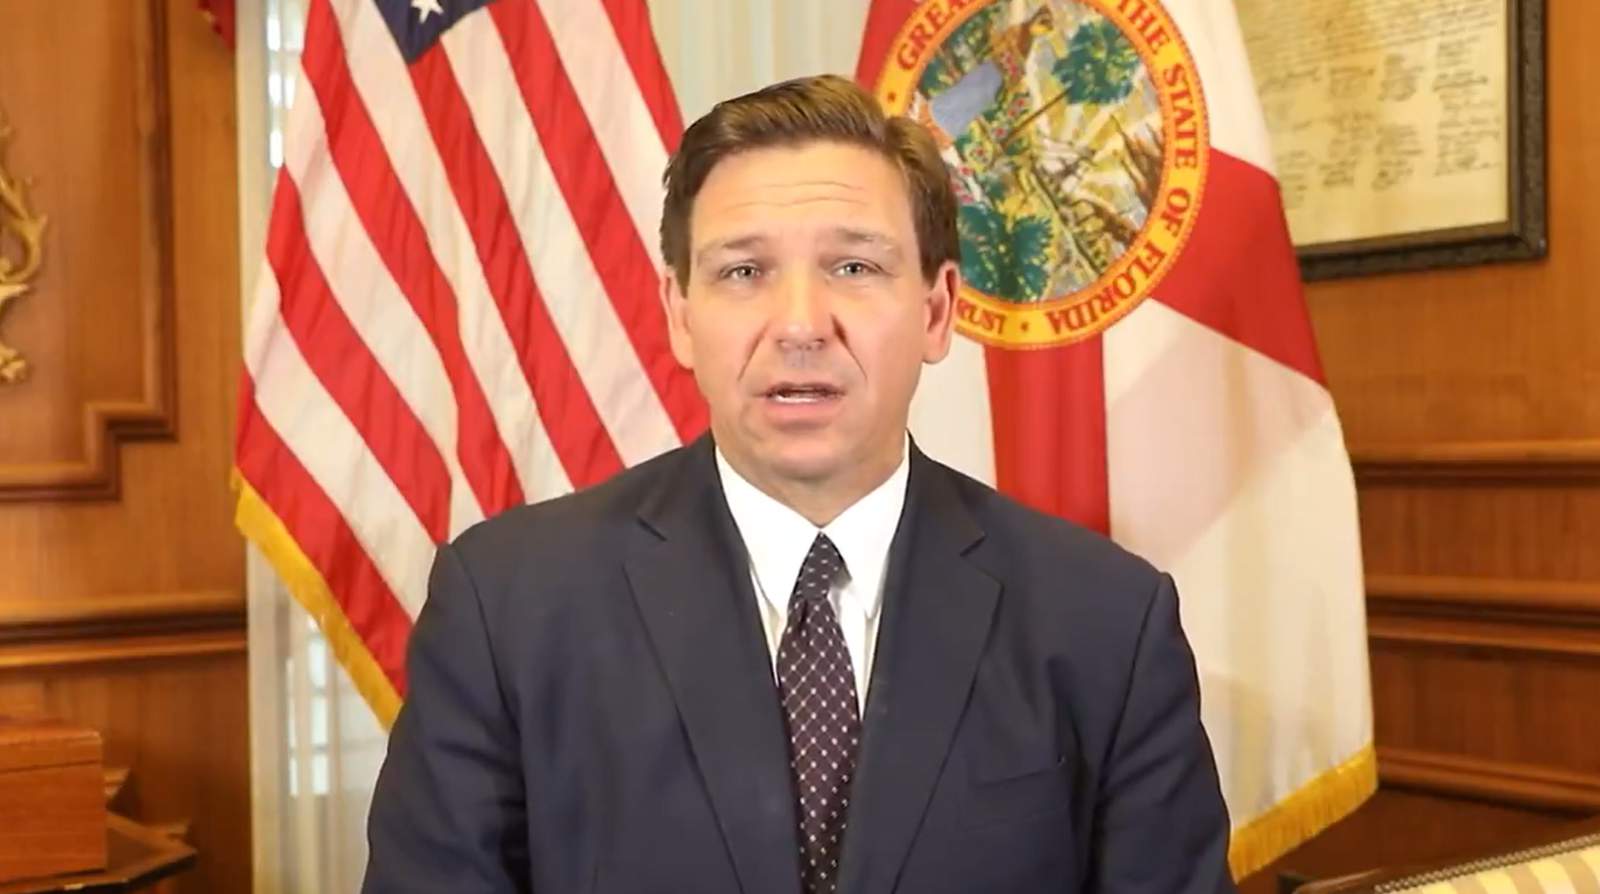 WATCH LIVE at 10:30 a.m.: Florida Gov. Ron DeSantis holds roundtable with public health experts